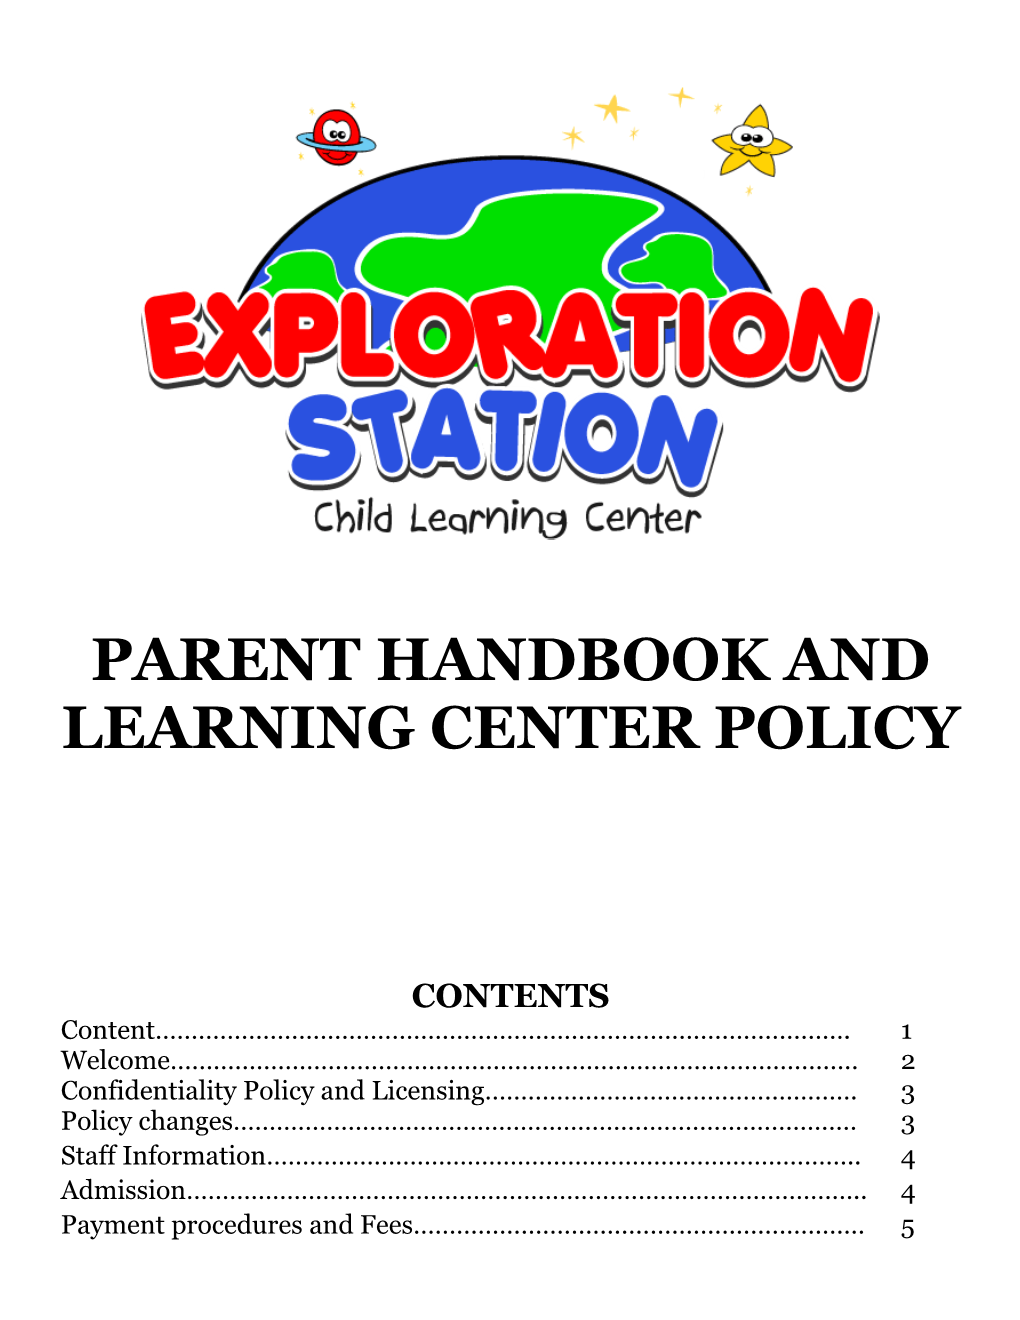 Parent Handbook and Learning Center Policy